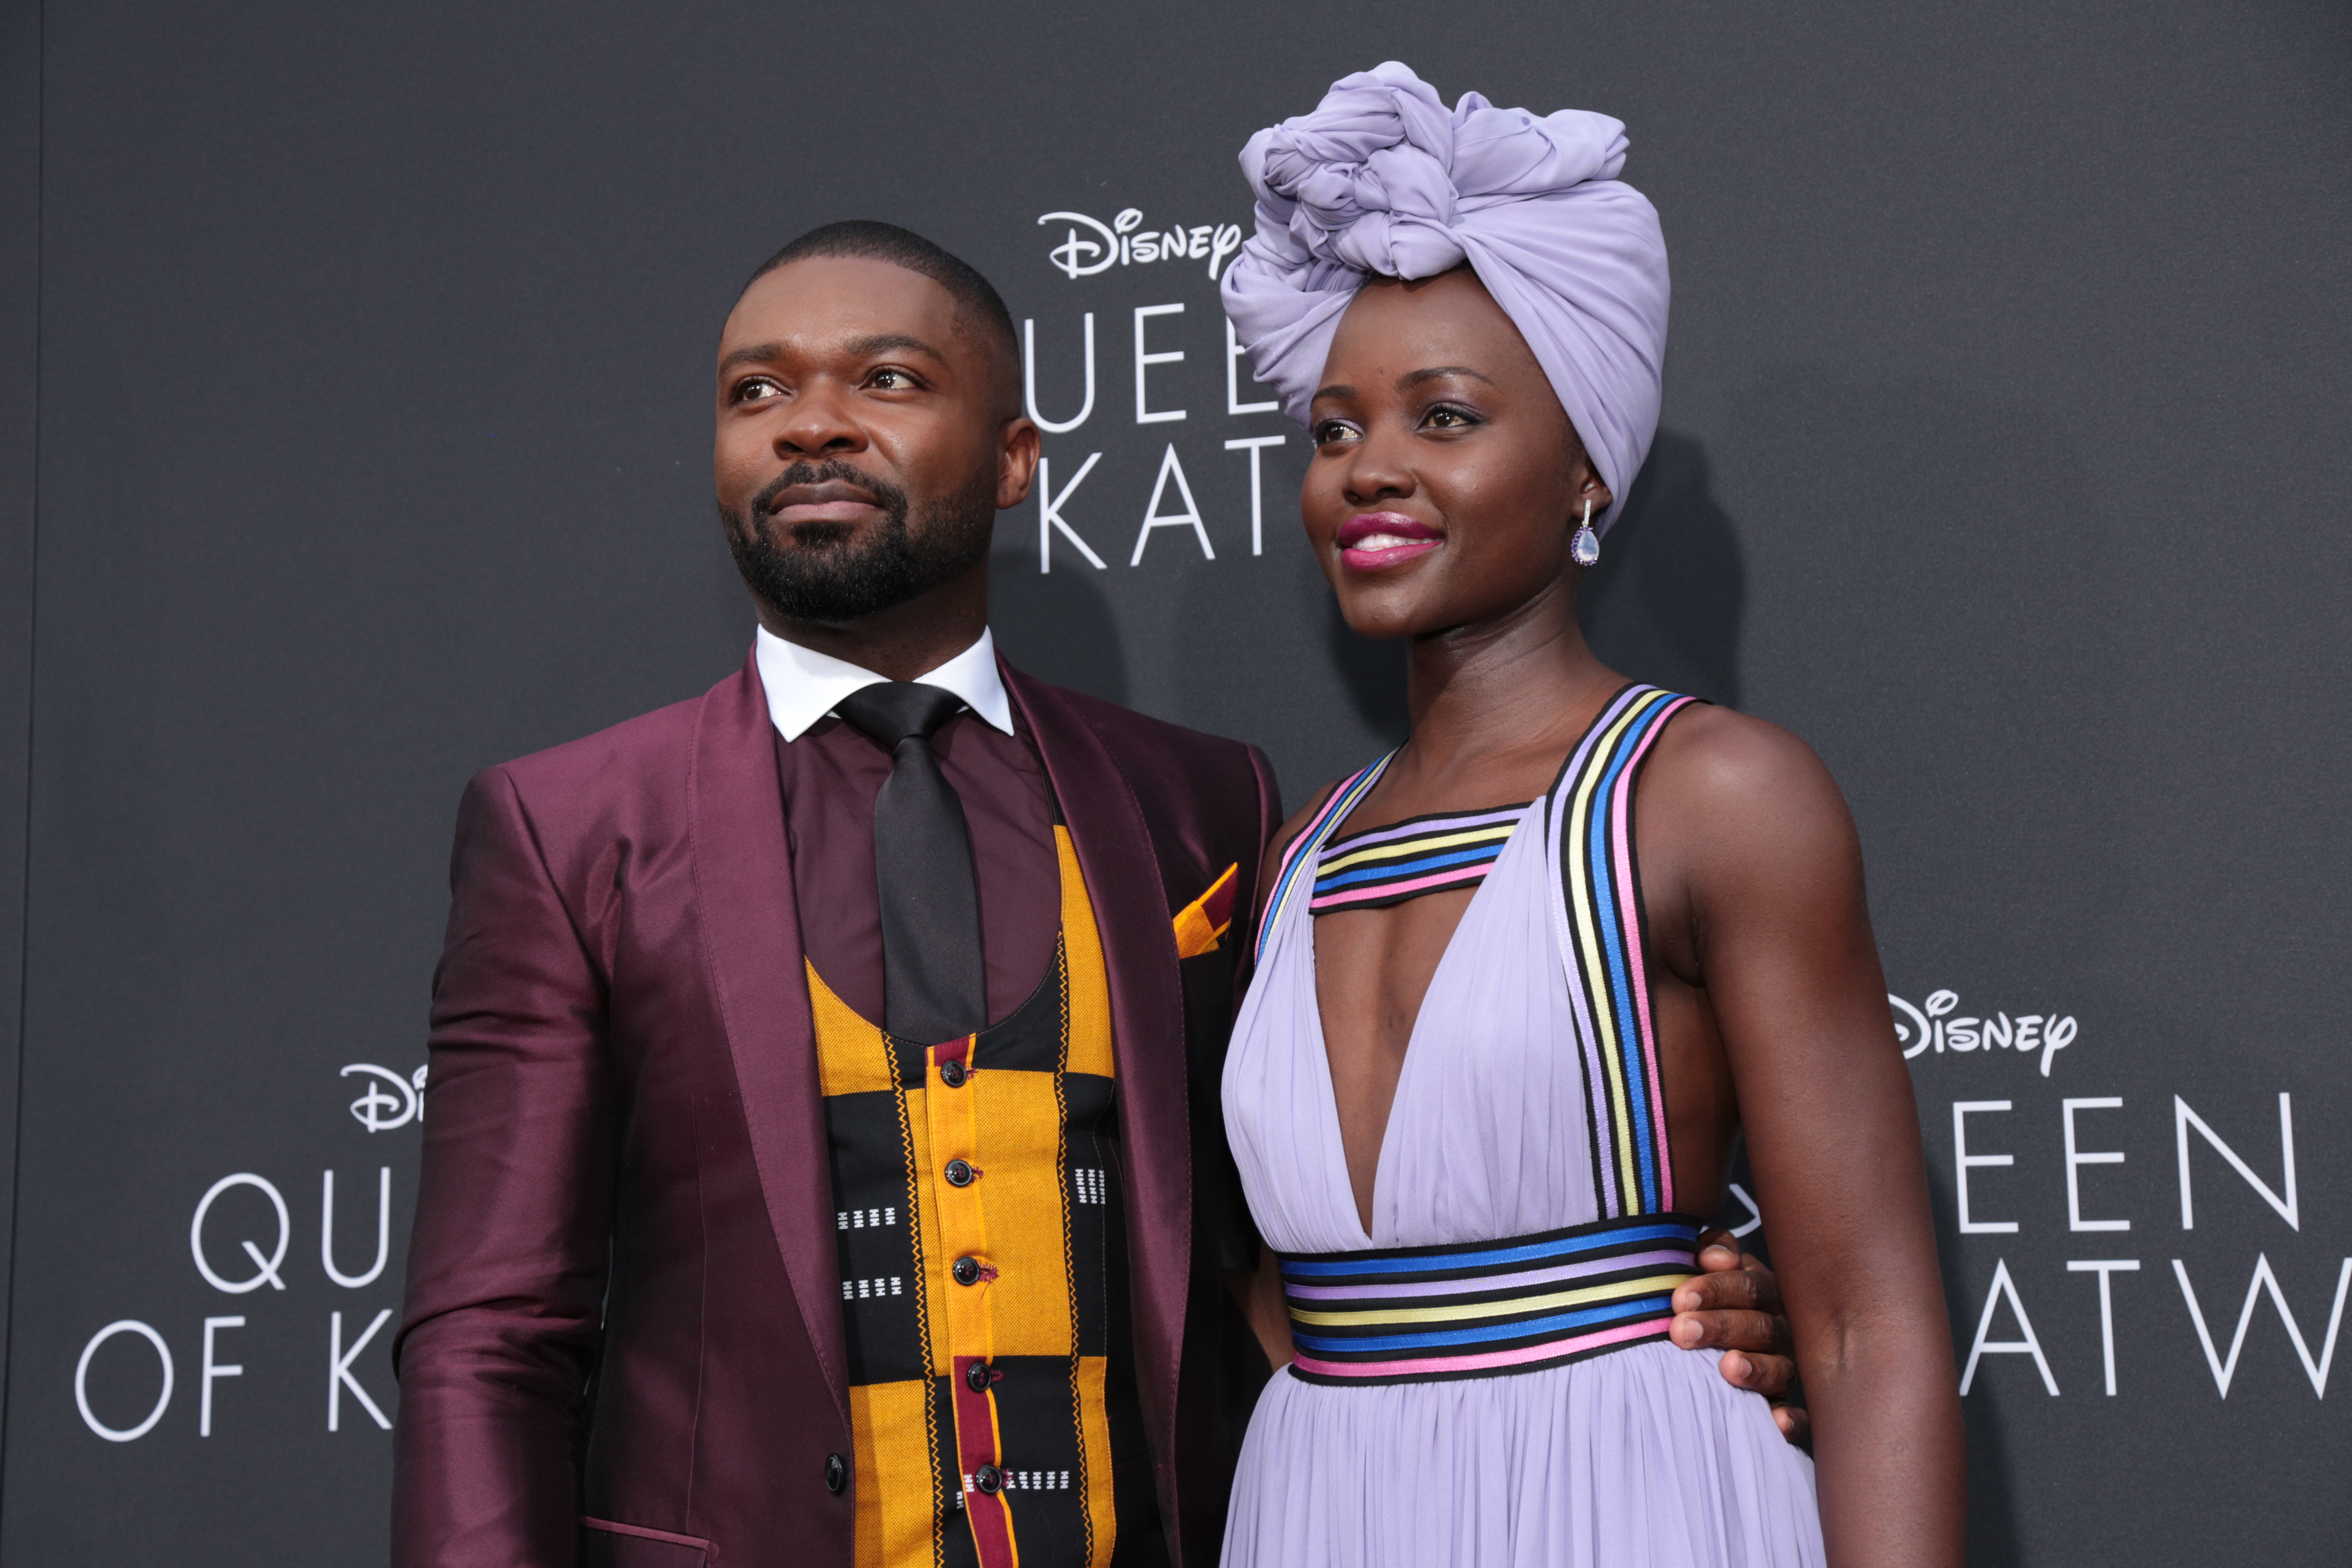 David Oyelowo, Lupita Nyong'o arrive at the U.S. premiere of DisneyÕs ÒQueen of KatweÓ at the El Capitan Theatre in Hollywood, CA on Tuesday, September 20, 2016. The film, starring David Oyelowo, Oscar winner Lupita NyongÕo and newcomer Madina Nalwanga, is directed by Mira Nair and opens in U.S. theaters in limited release on September 23, expanding wide September 30, 2016...(Photo: Alex J. Berliner/ABImages)